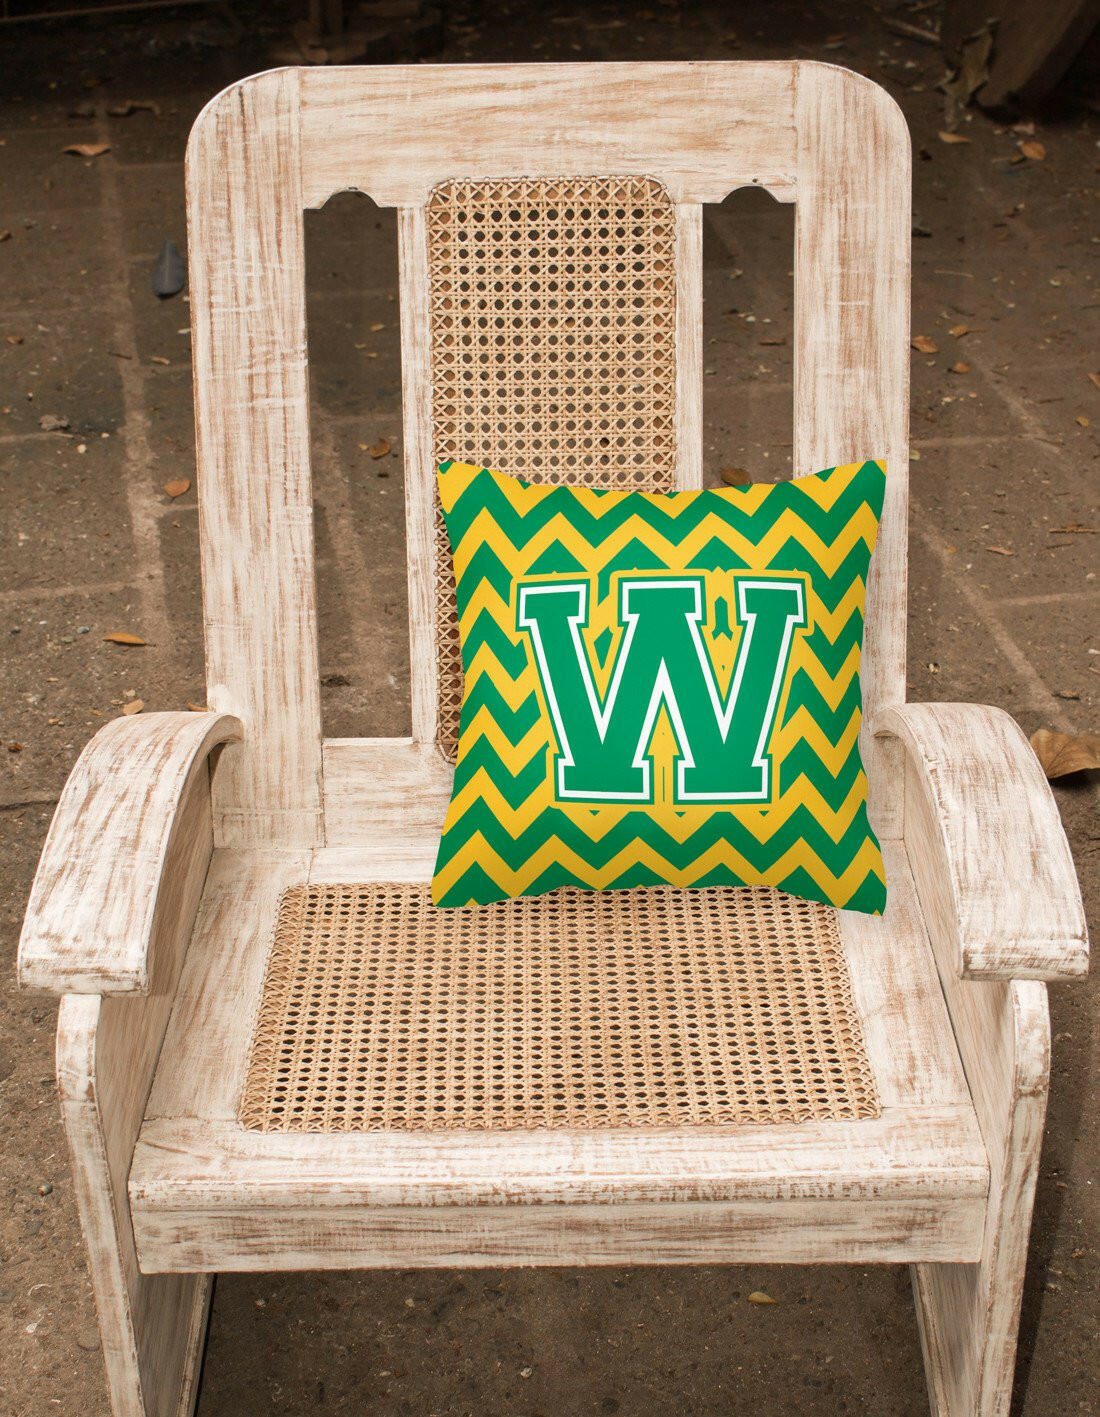 Letter W Chevron Green and Gold Fabric Decorative Pillow CJ1059-WPW1414 by Caroline's Treasures